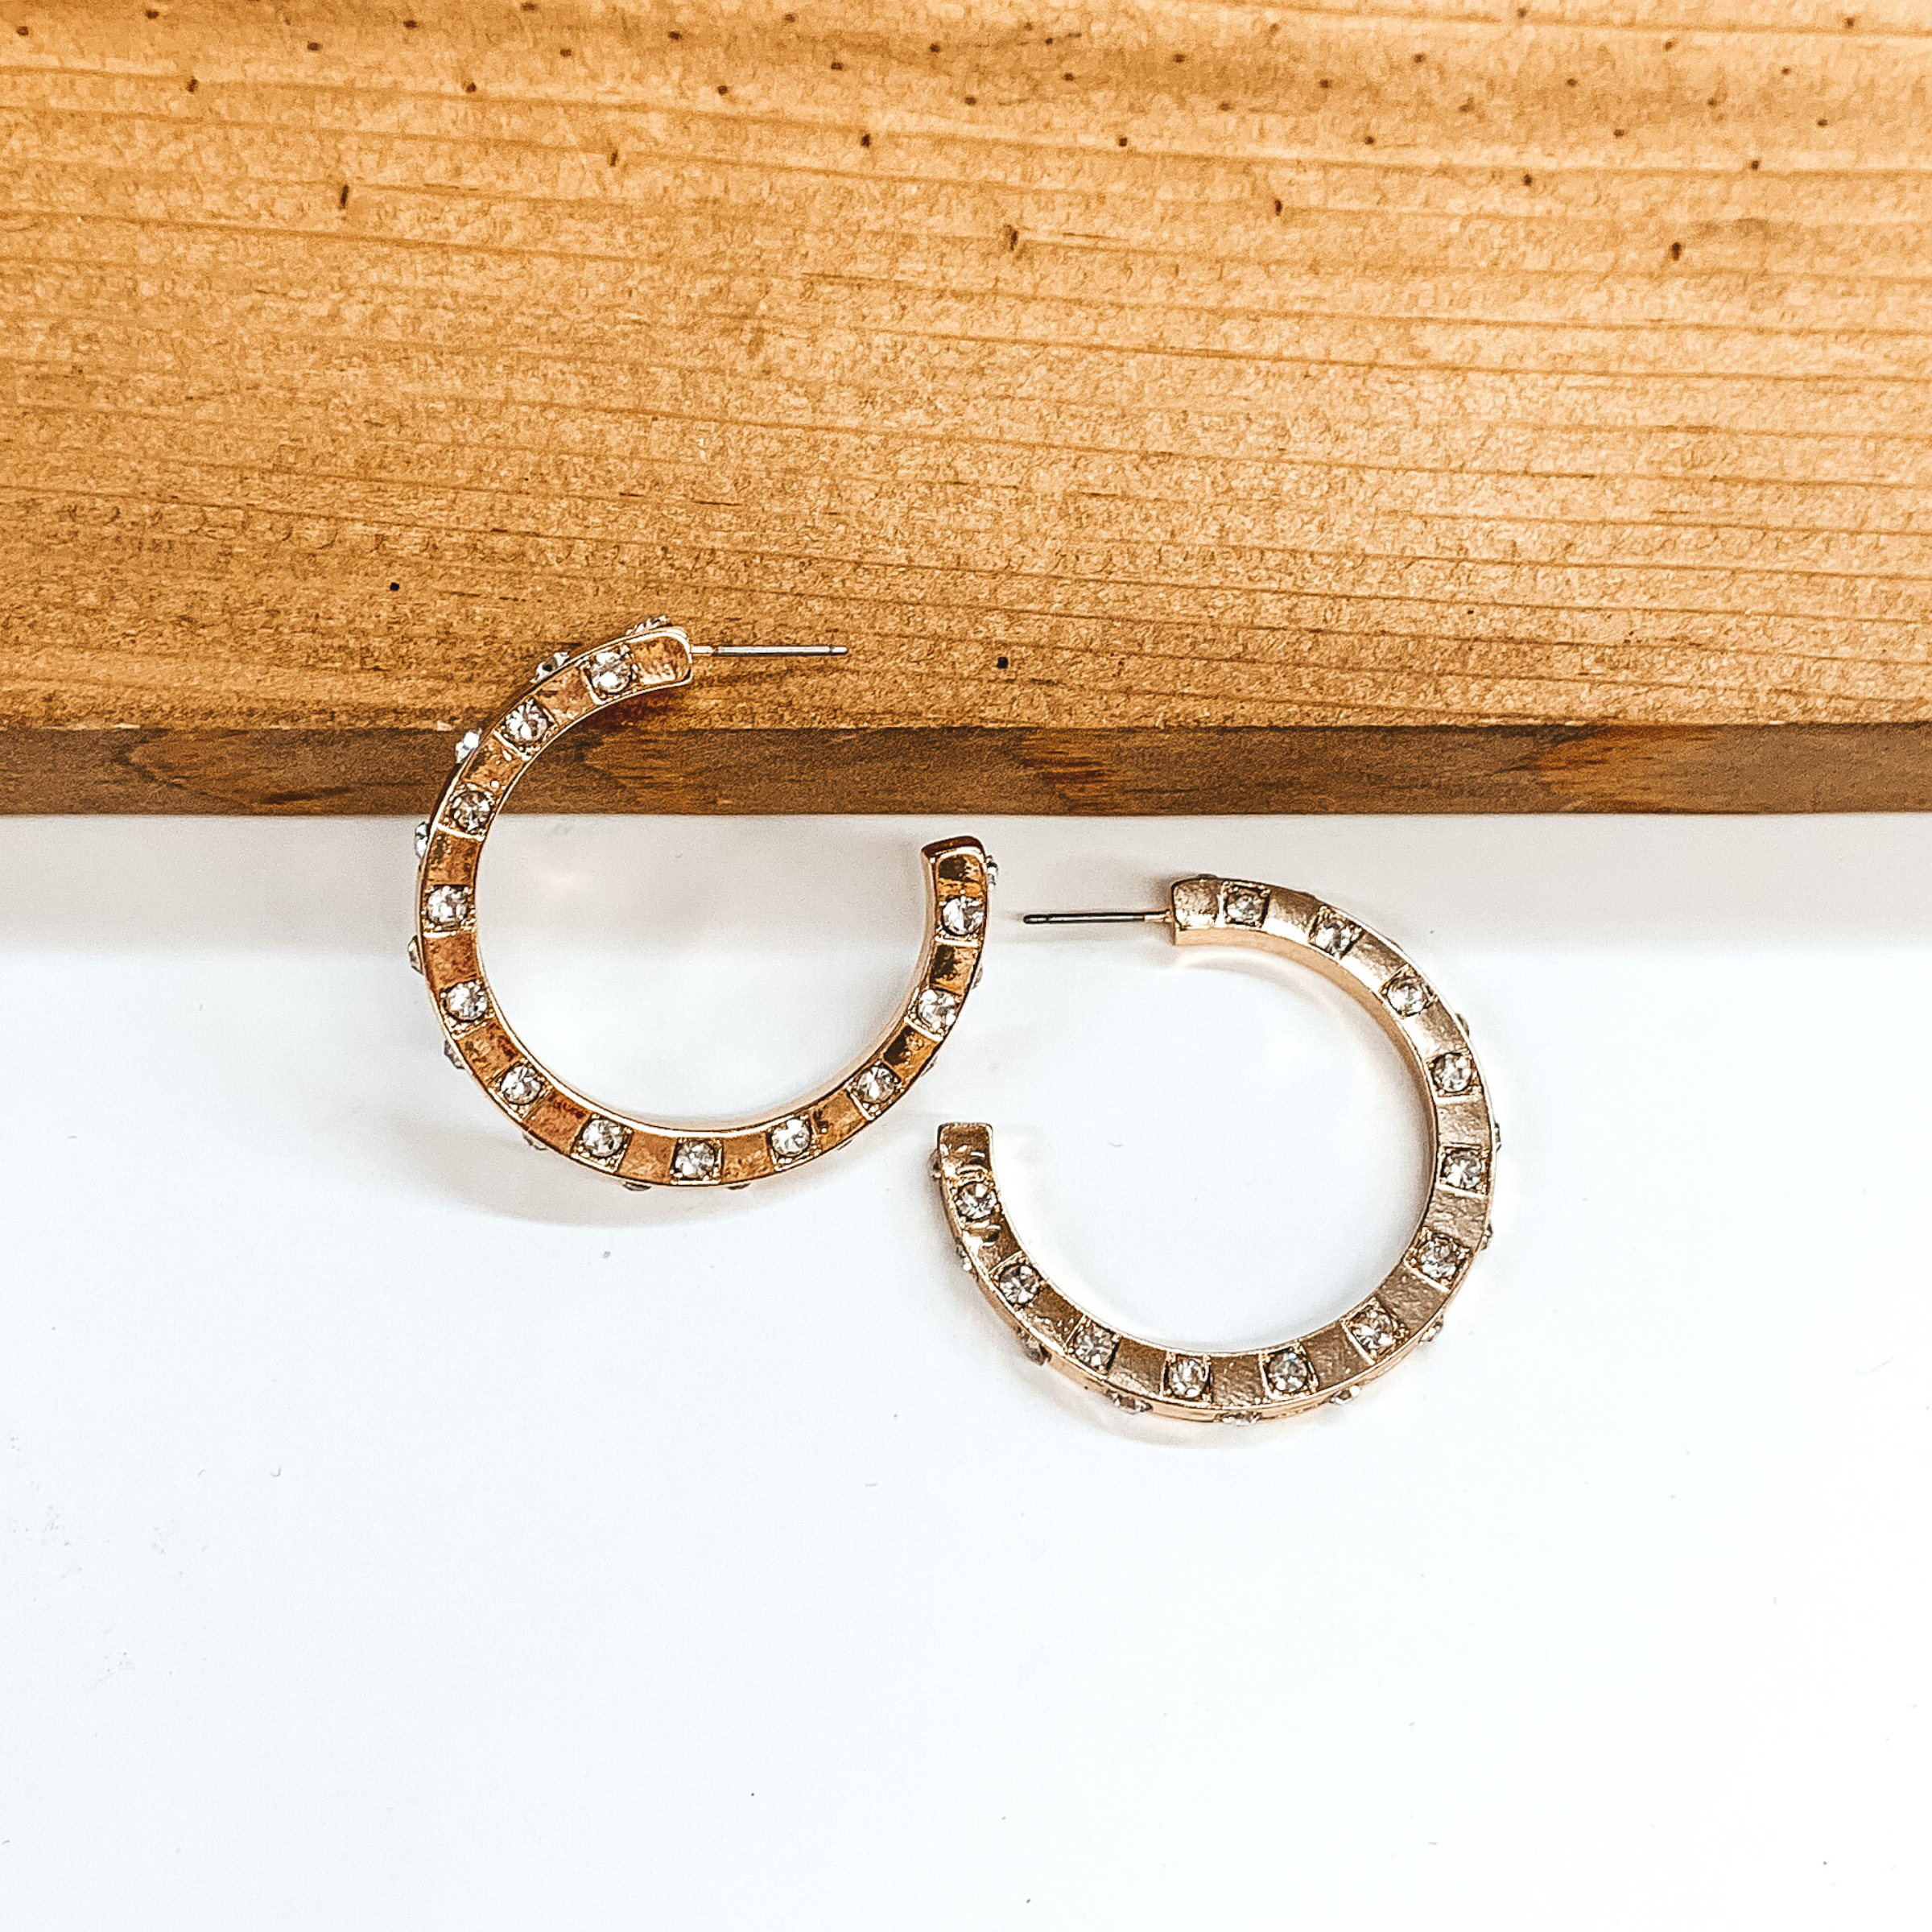 Gold hoop earrings with spaced out clear crystals. One earrings is pictured laying on a brown block while the other earrings is pictured laying flat on the white background.